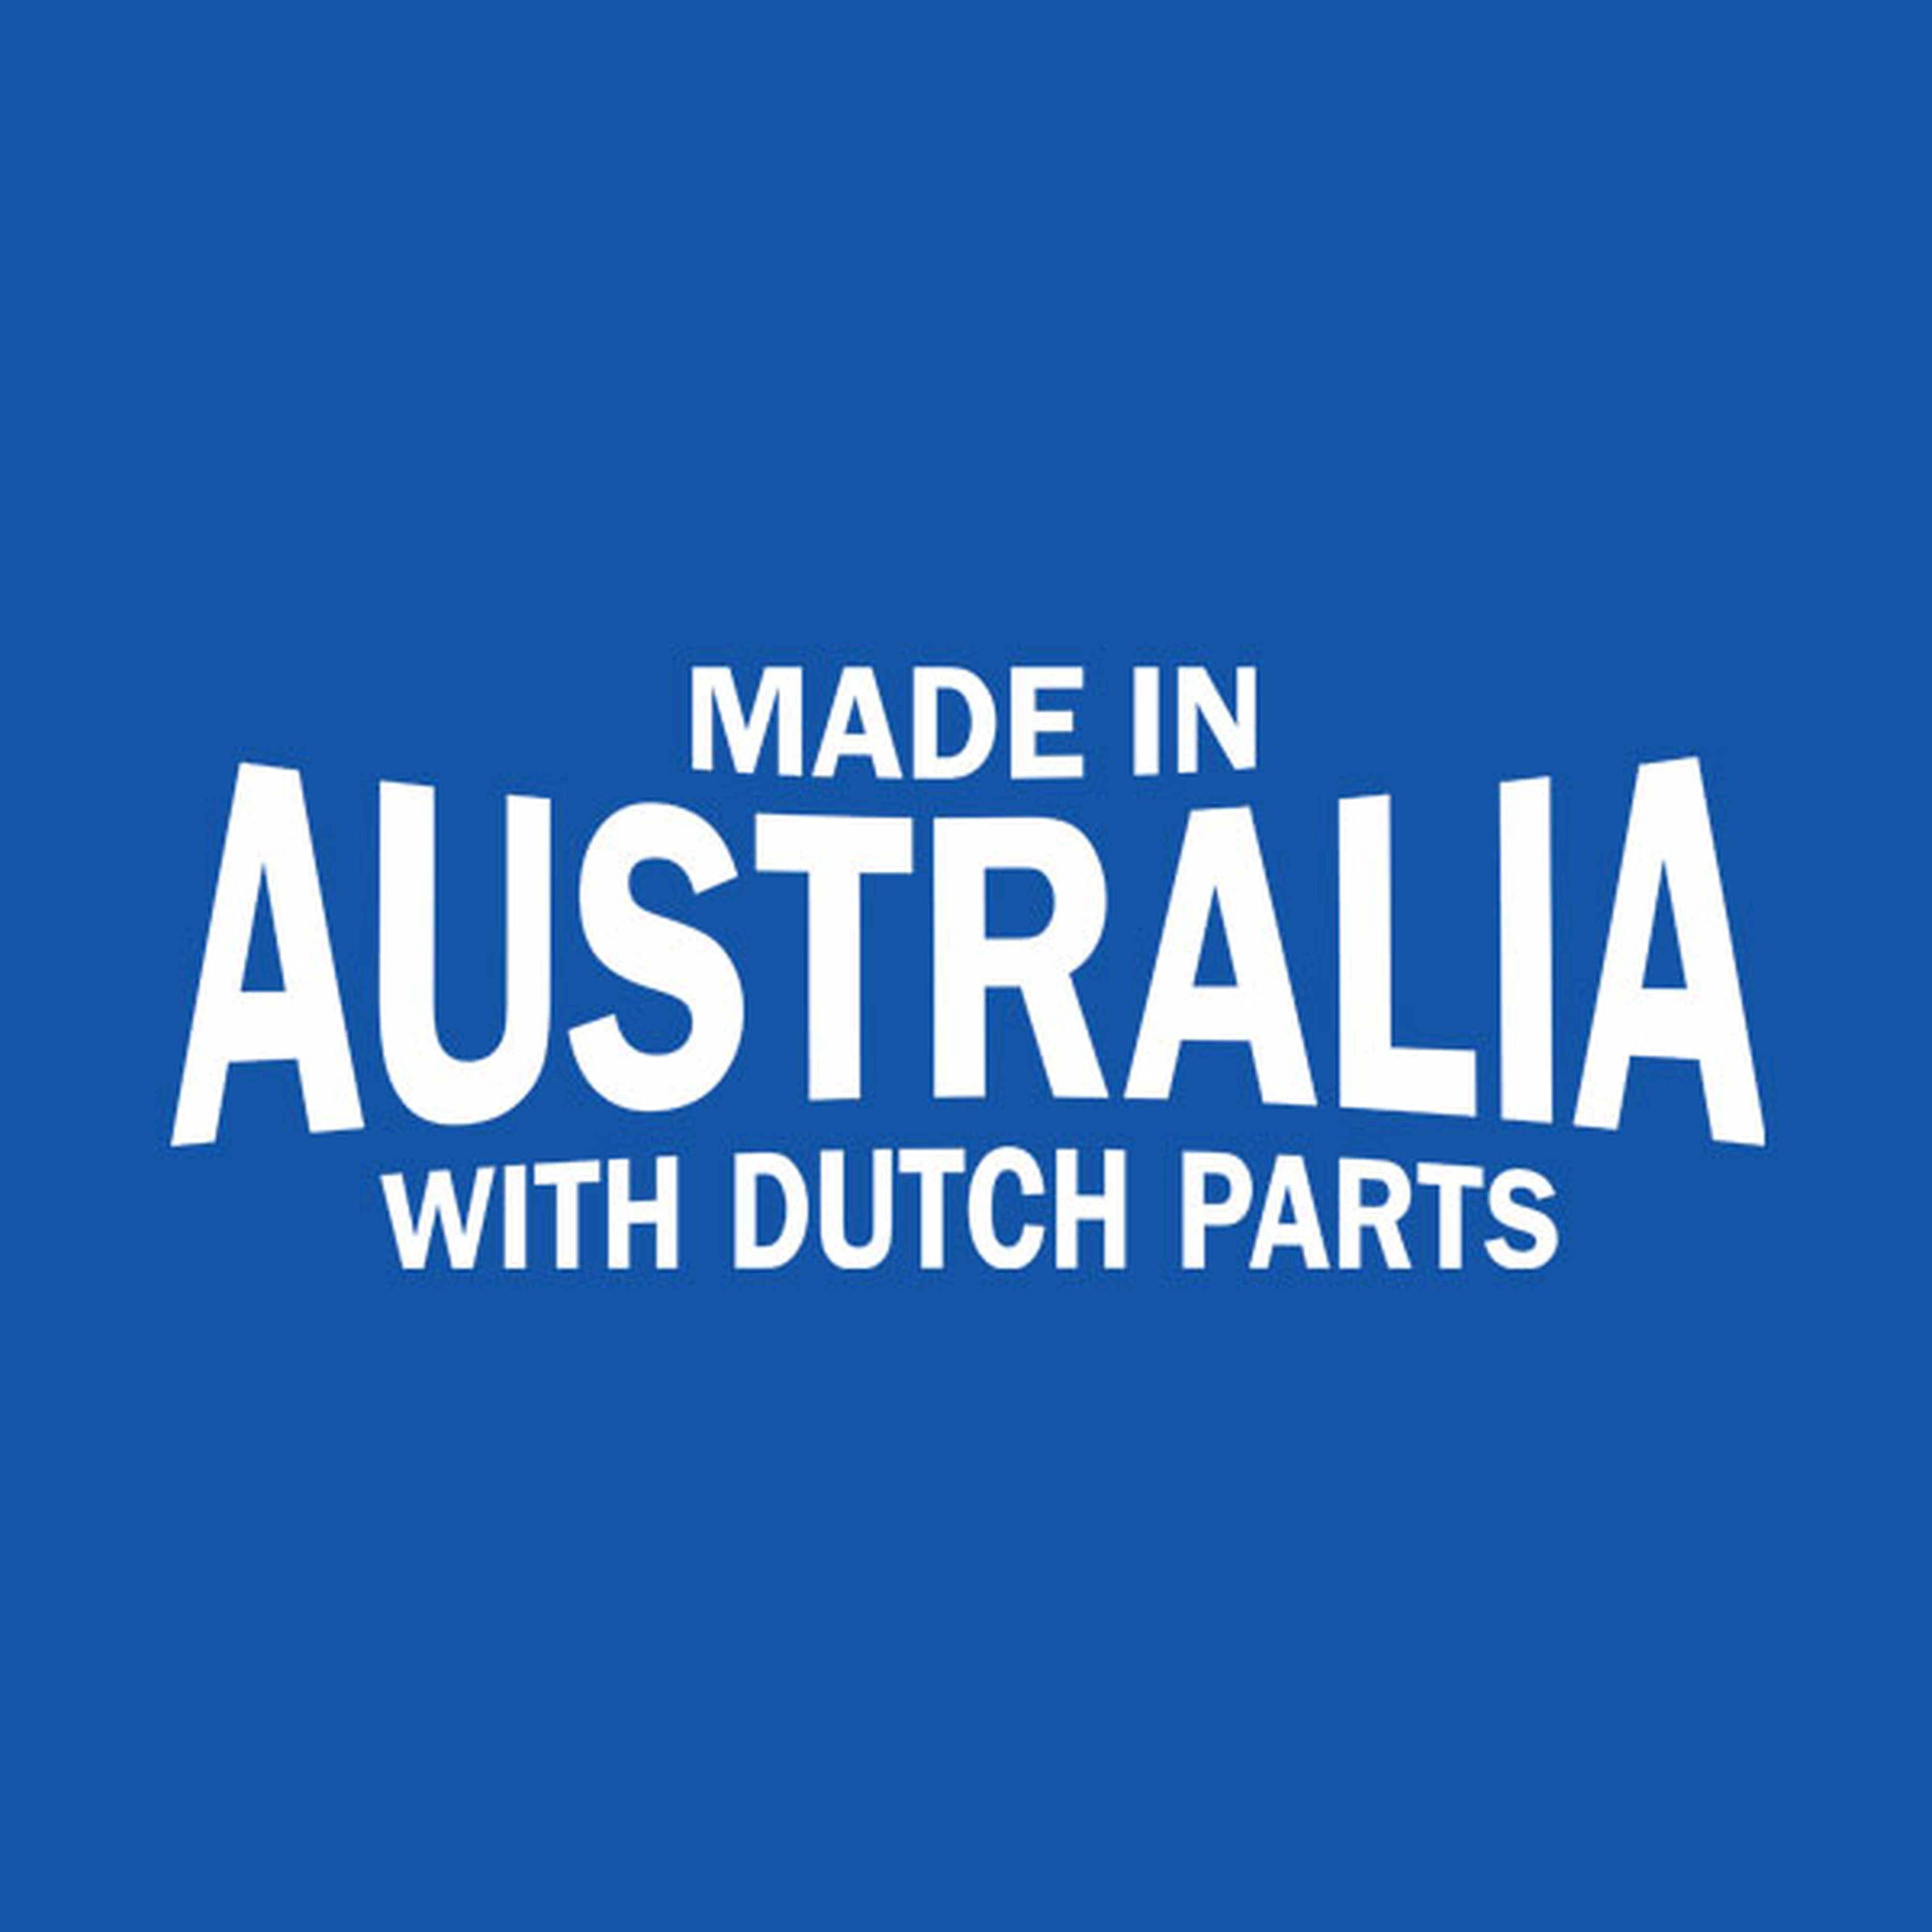 Made in Australia with Dutch parts